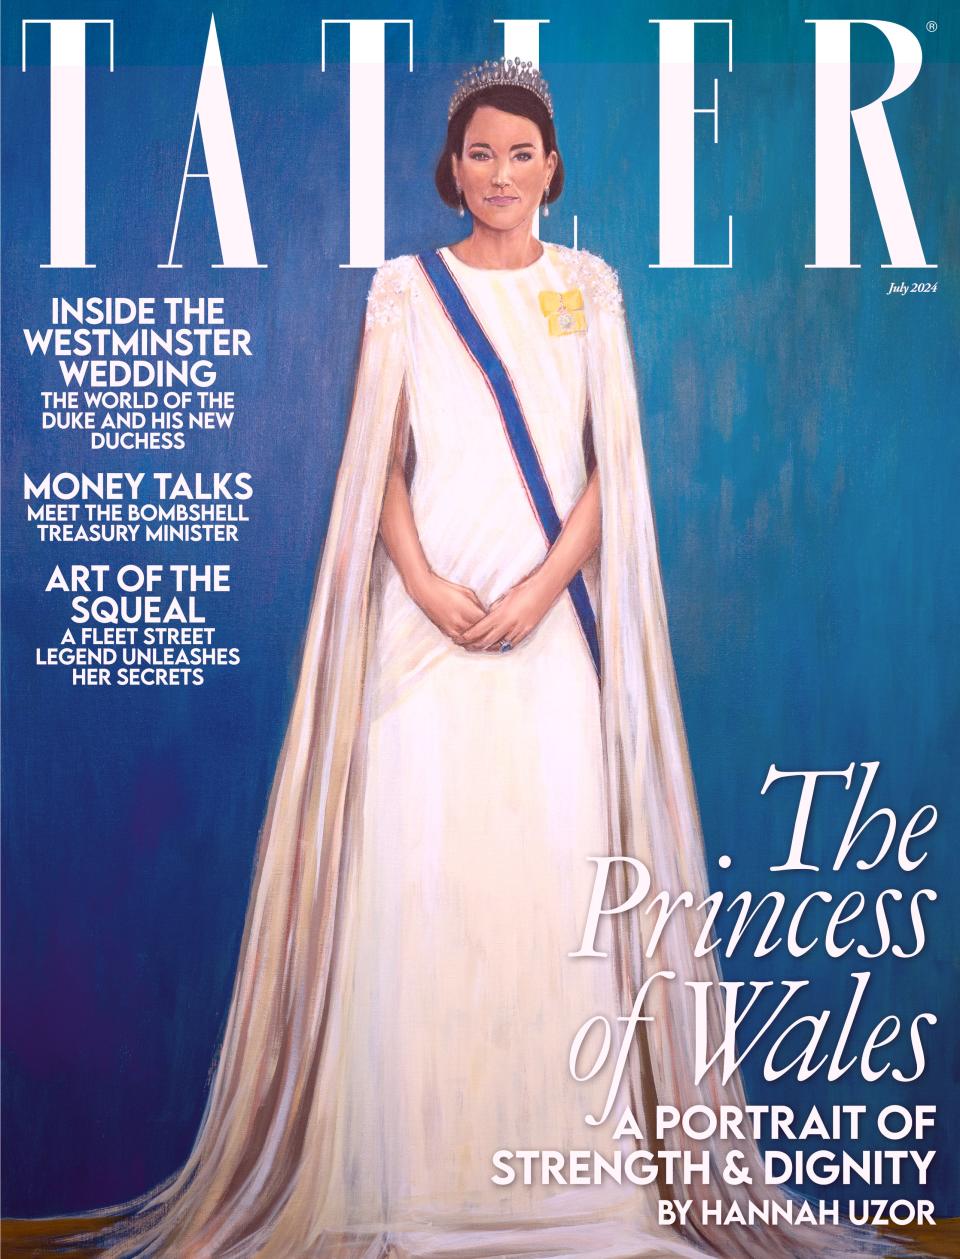 Kate Middleton’s new portrait features on the cover of Tatler magazine (Hannah Uzor/Tatler/PA Wire)